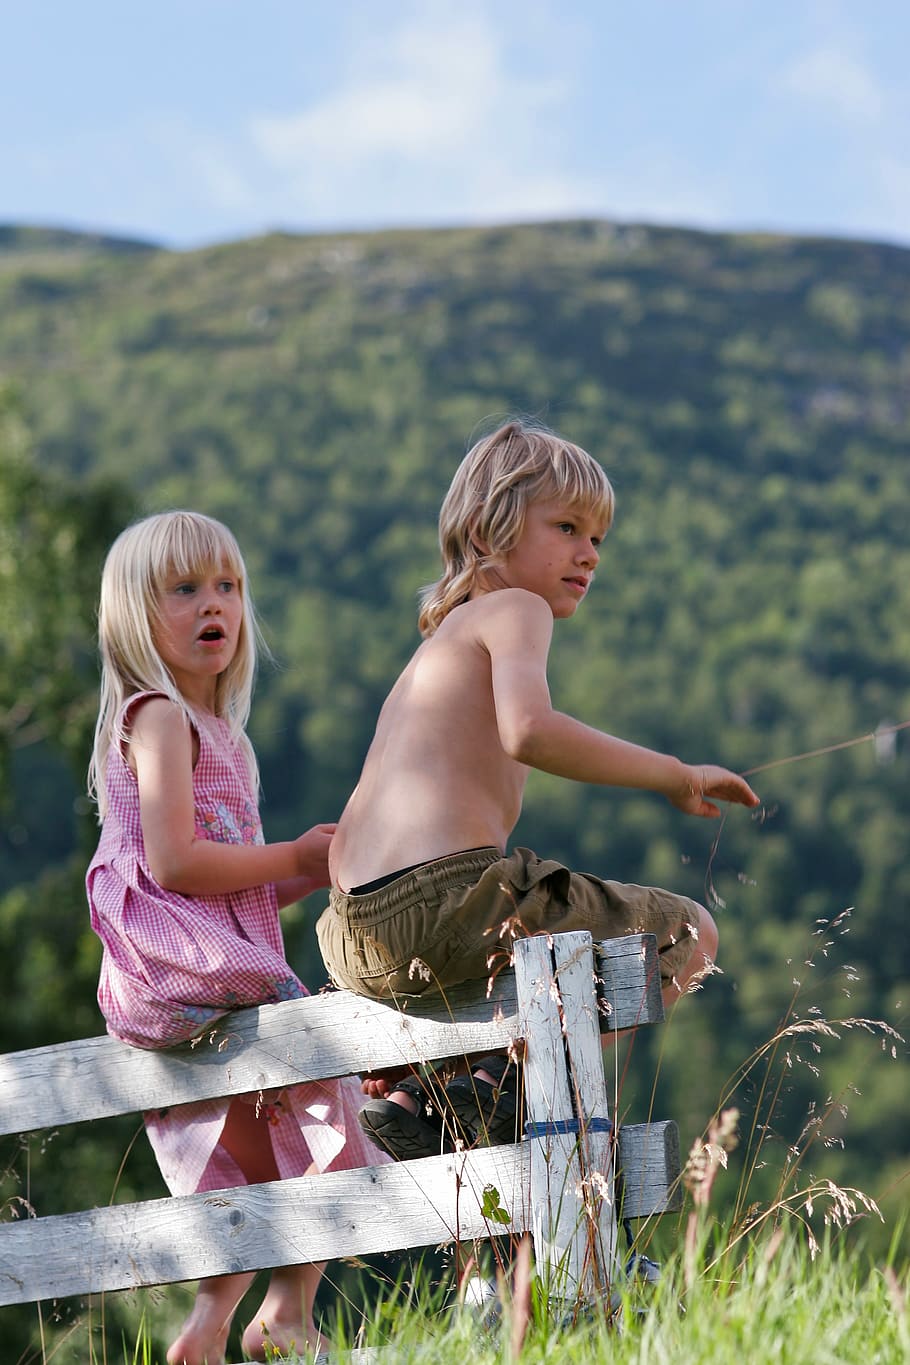 boy, girl, sitting, white, wooden, fence, mountains, boy and girl, outdoors, child